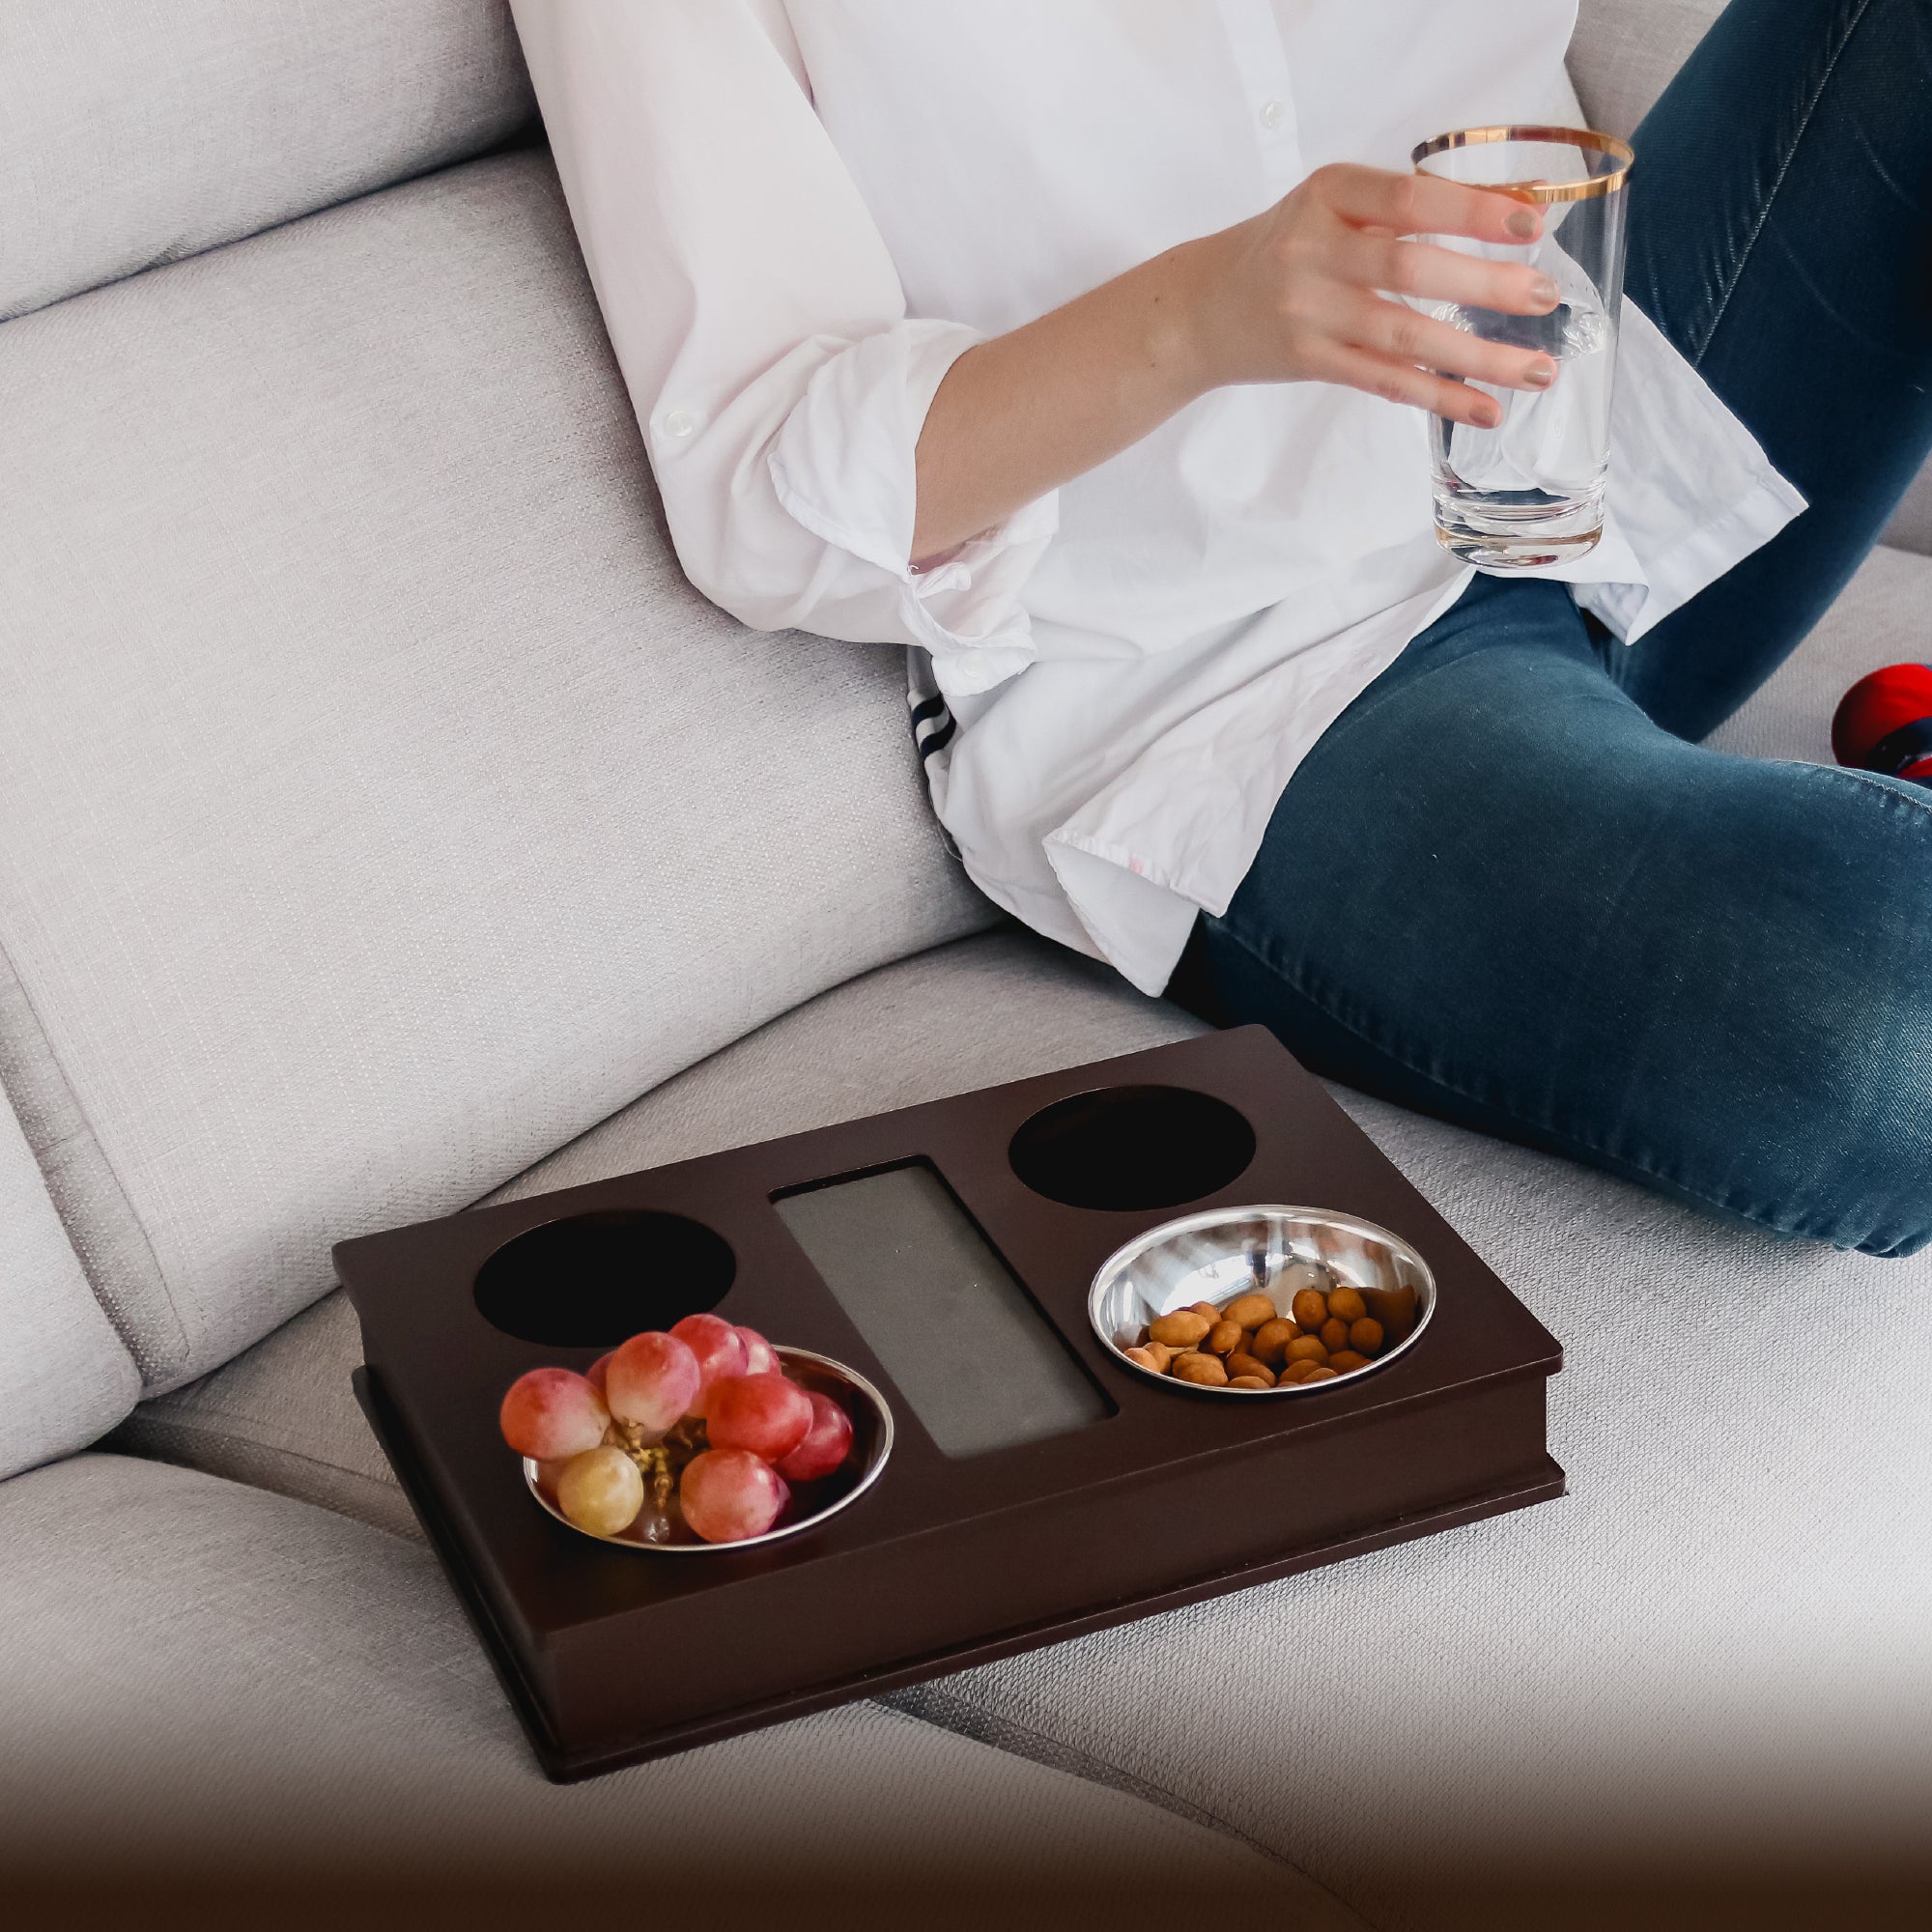 Sofa, Couch, Bed, TV and Lap Serving Tray Table for Eating with Anti S